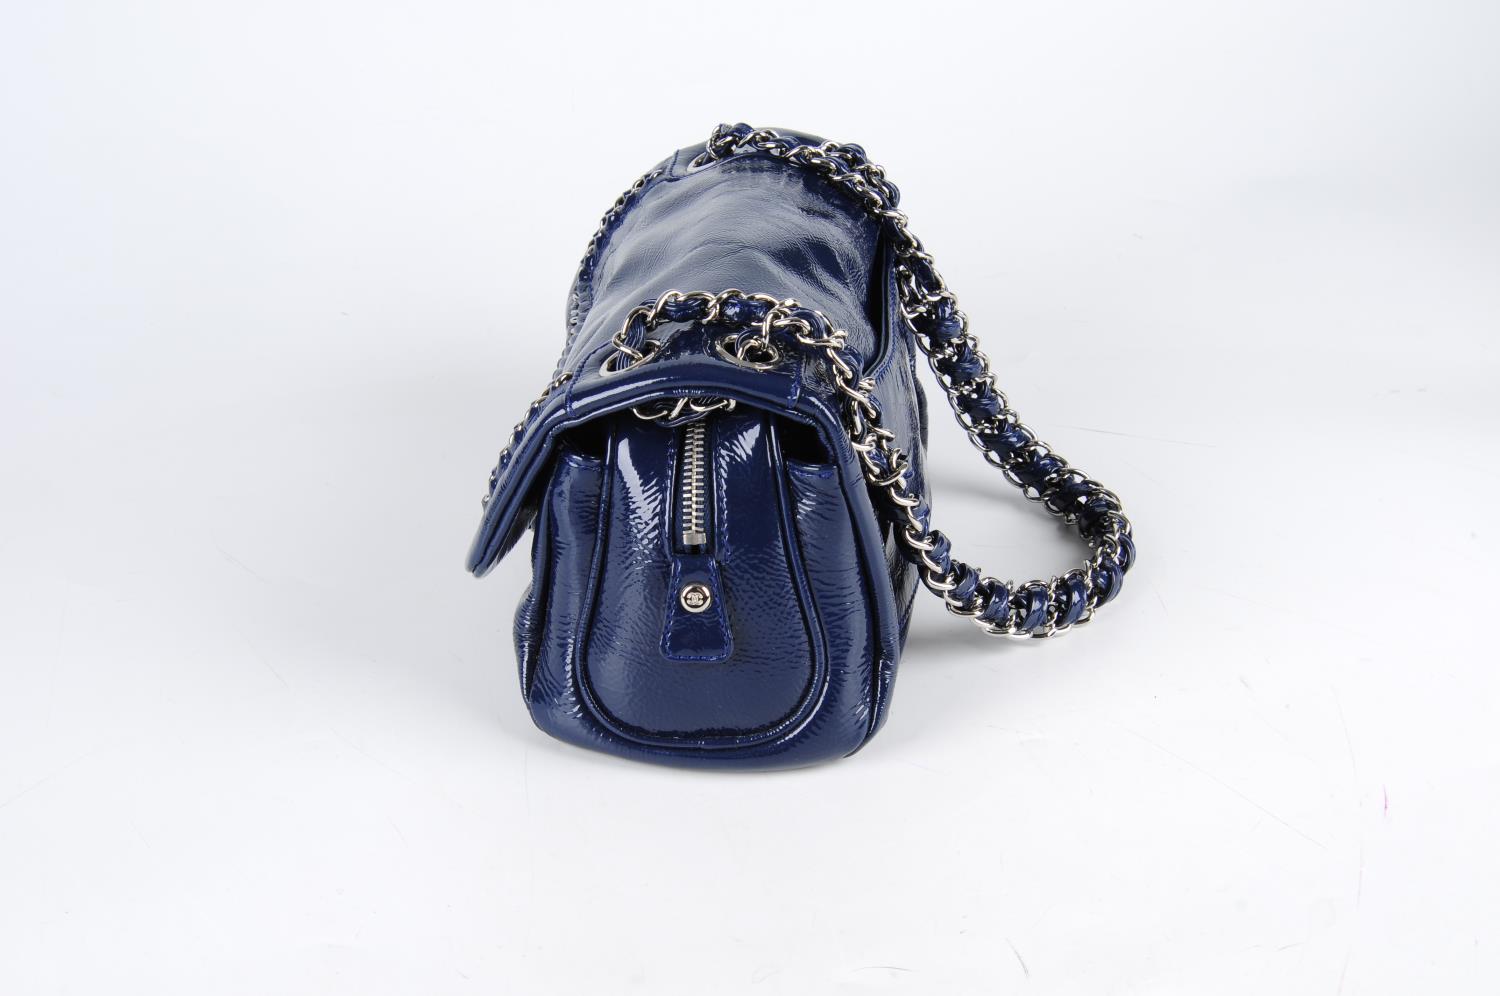 CHANEL - a small Luxe Ligne Flap handbag. - Image 3 of 4